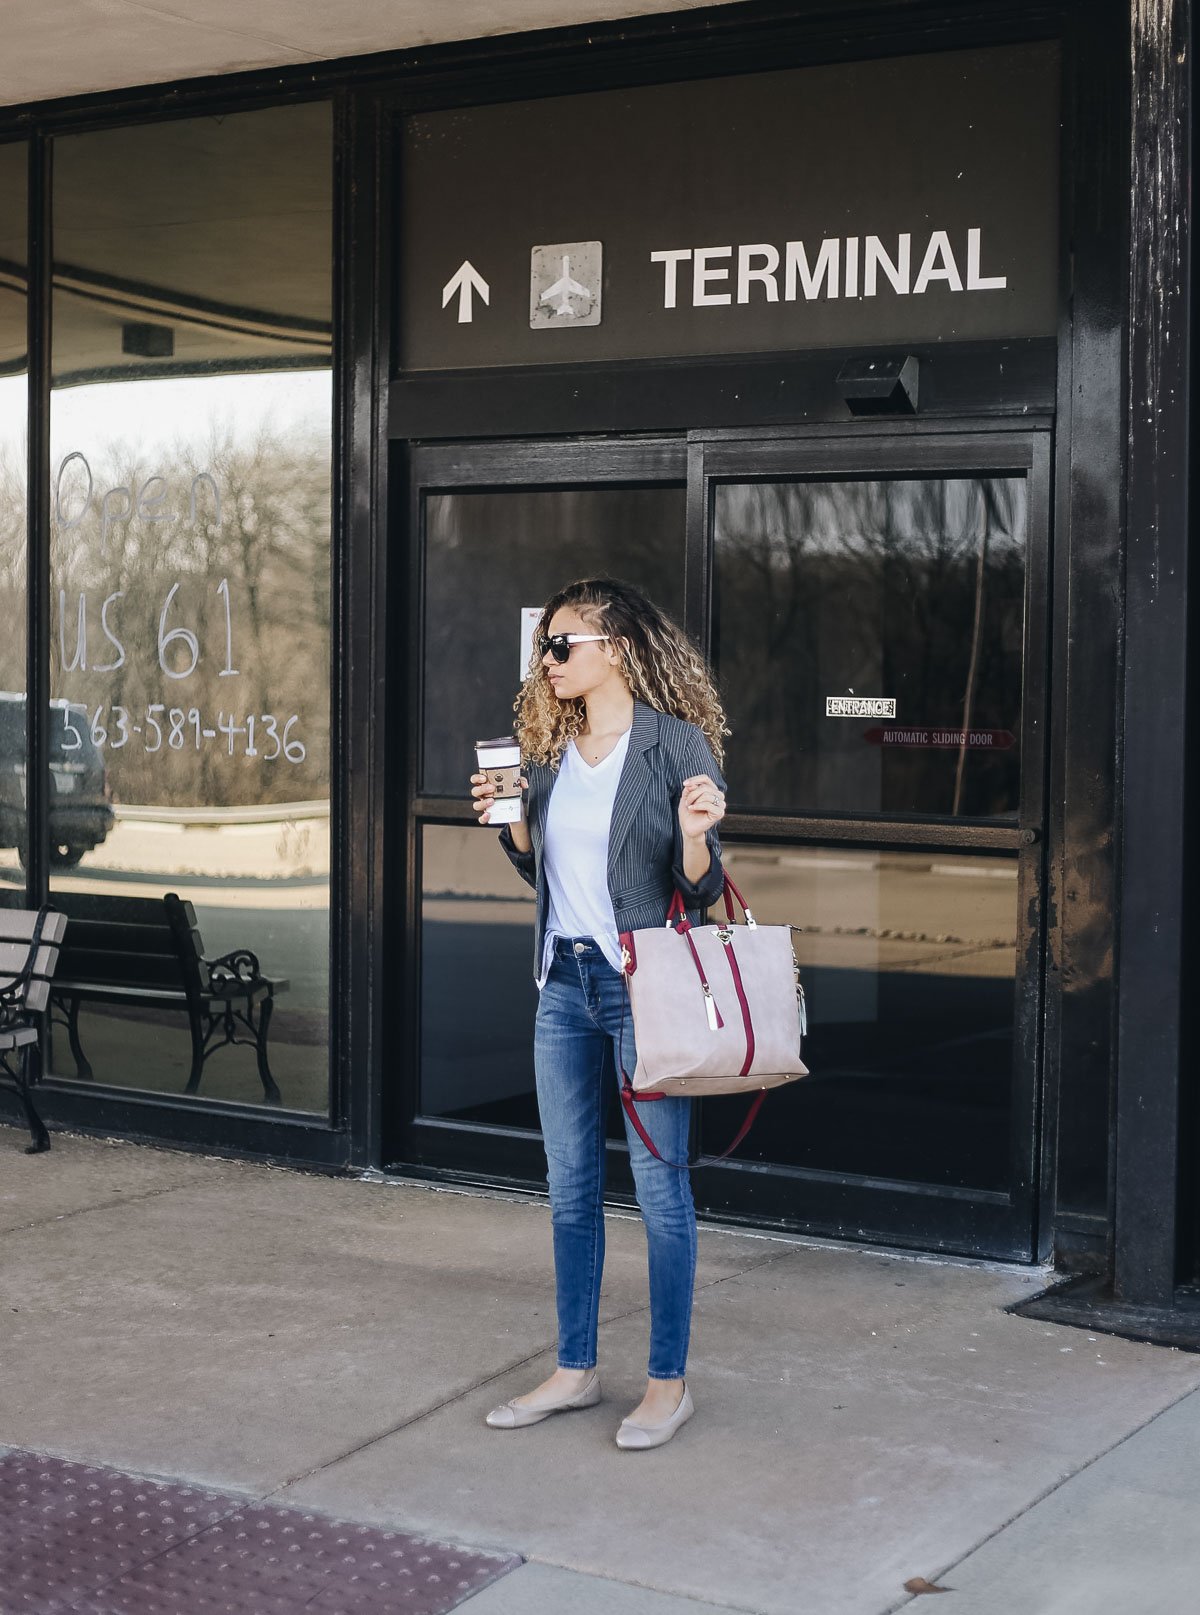 Are you a classy traveler that wants to look chic at the airport? Check out these travel outfits and accessories for your stylish traveling outfits!